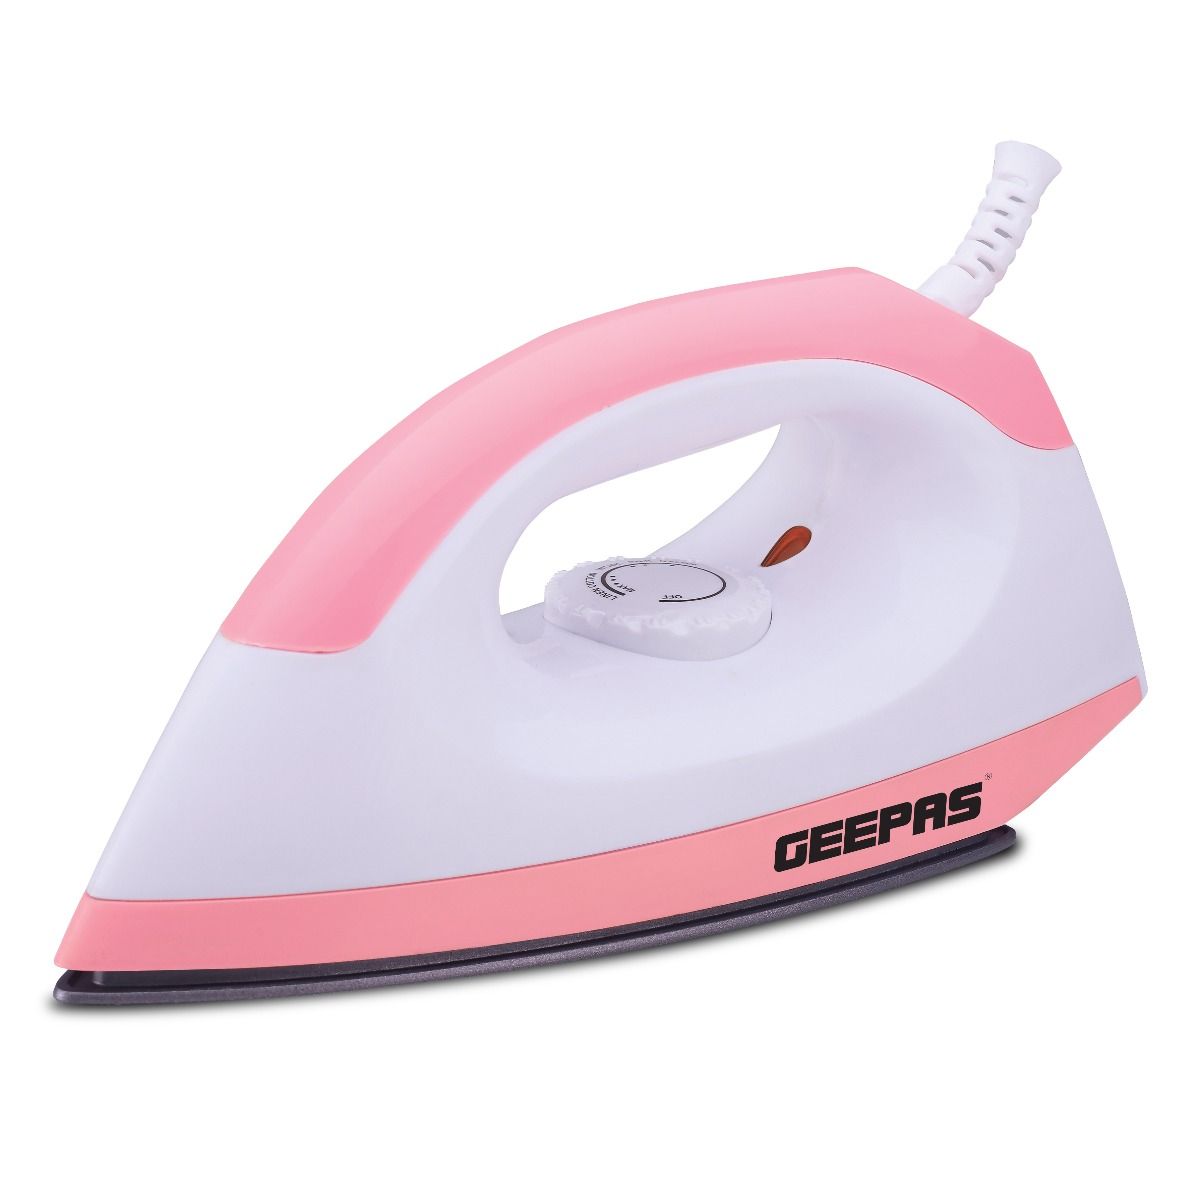 GEEPAS 1200W Dry Iron - Non-Stick Coating Plate & Adjustable Thermostat Control GDI7782